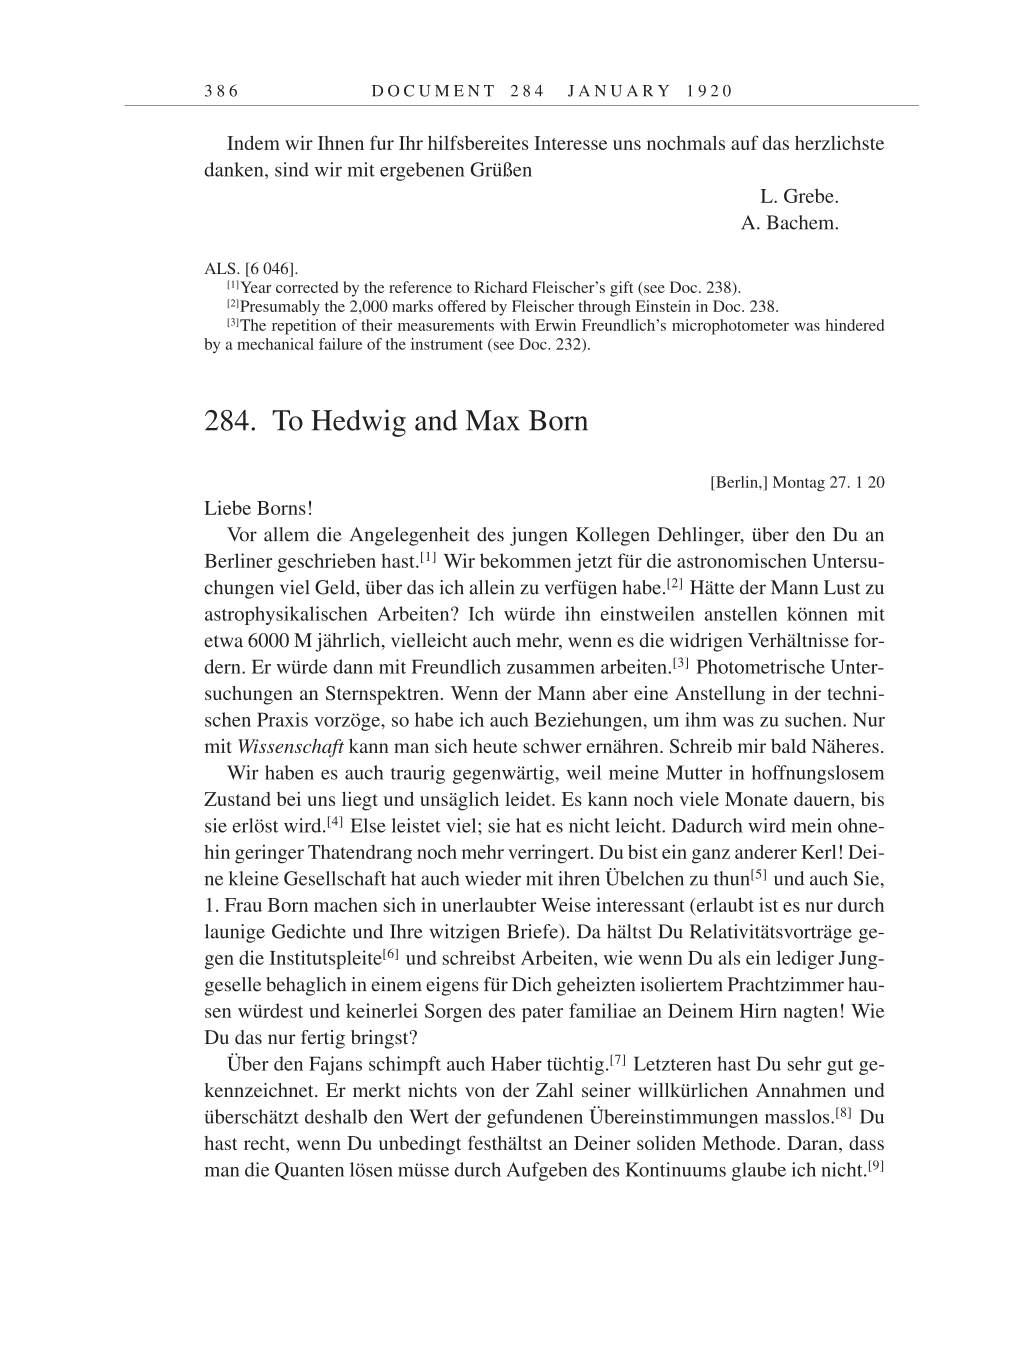 Volume 9: The Berlin Years: Correspondence January 1919-April 1920 page 386